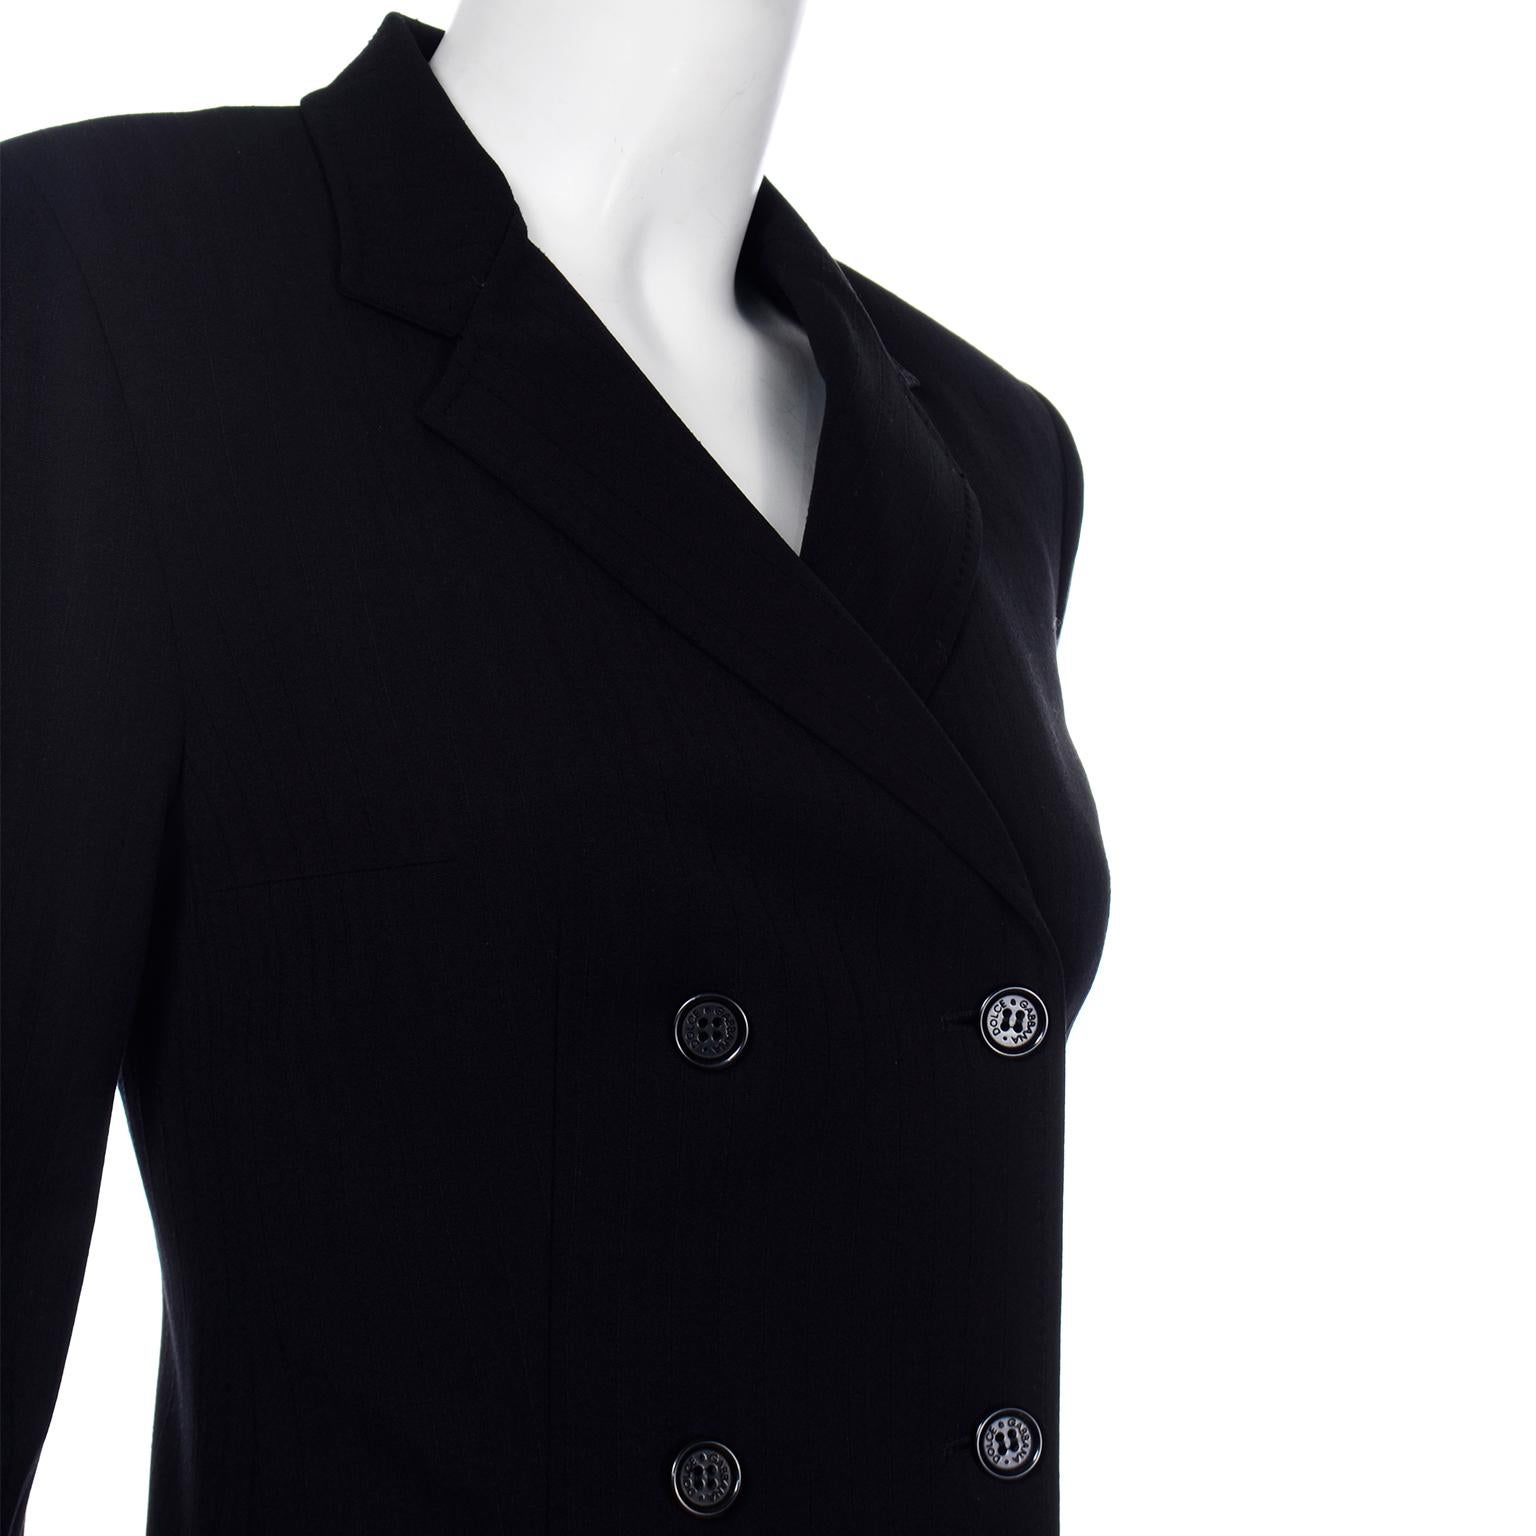 Vintage Dolce Gabbana Black Double Breasted Jacket and Skirt Suit For Sale 3